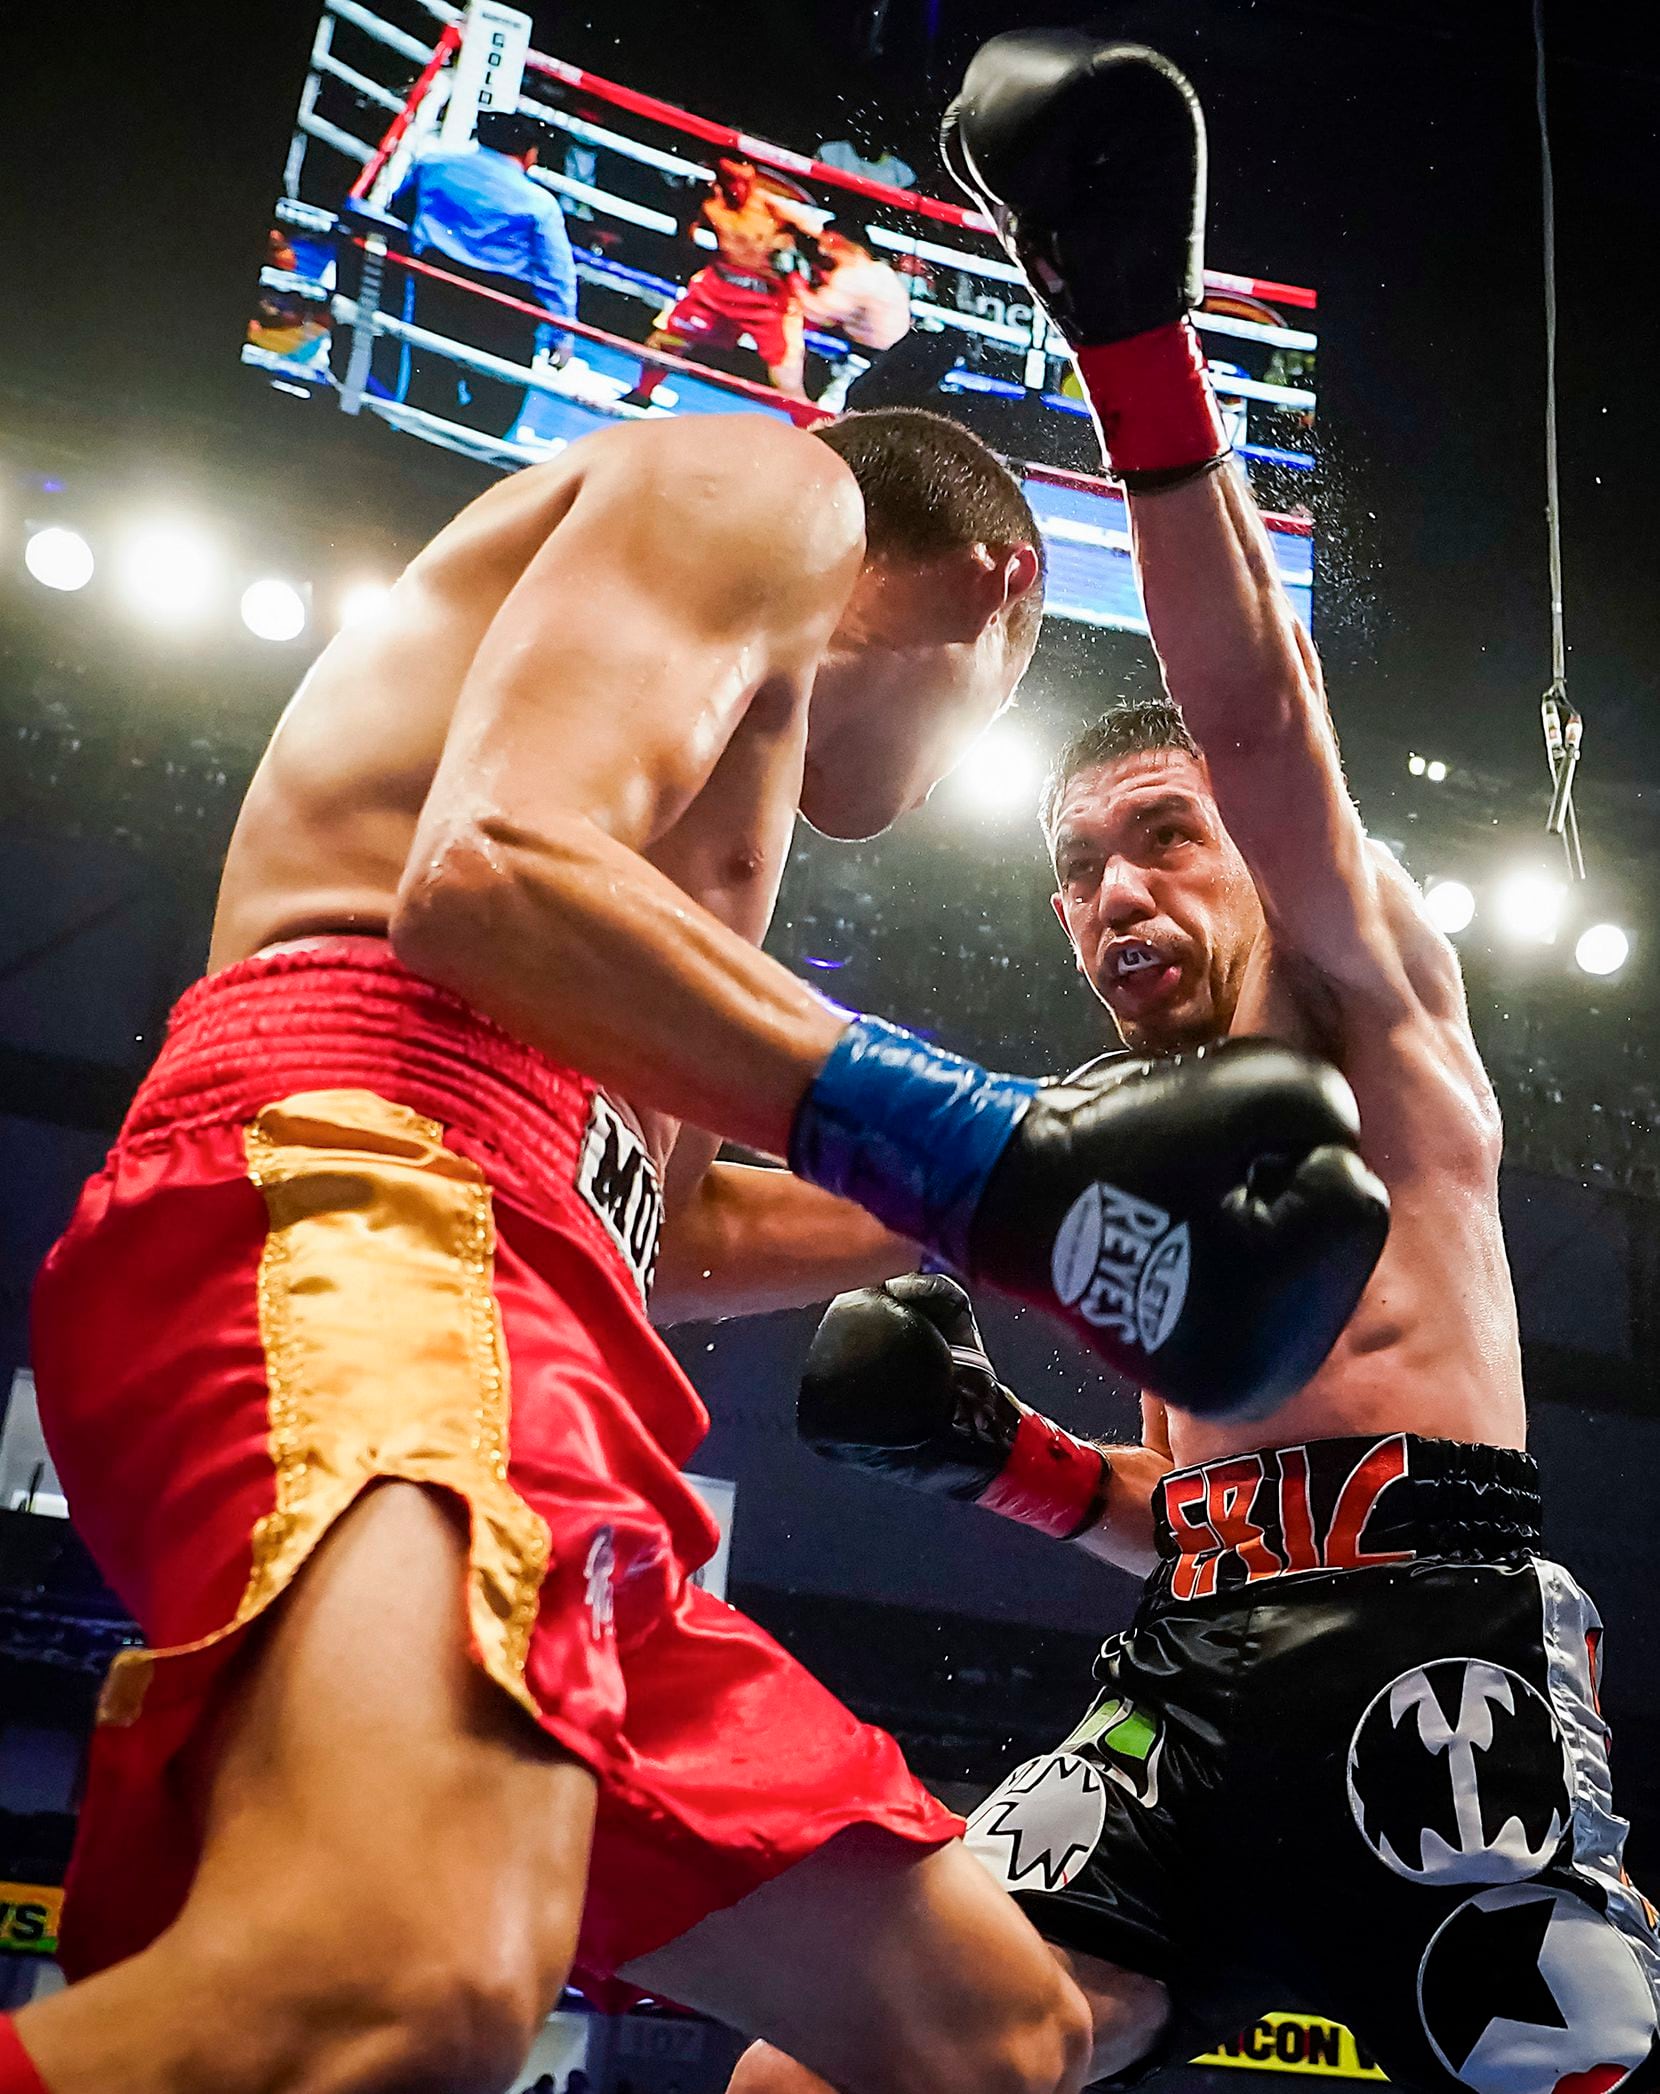 George Rincon (right) fights Luis Solis in a super lightweight bout at Dickies Arena on Saturday, March 20, 2021, in Fort Worth.